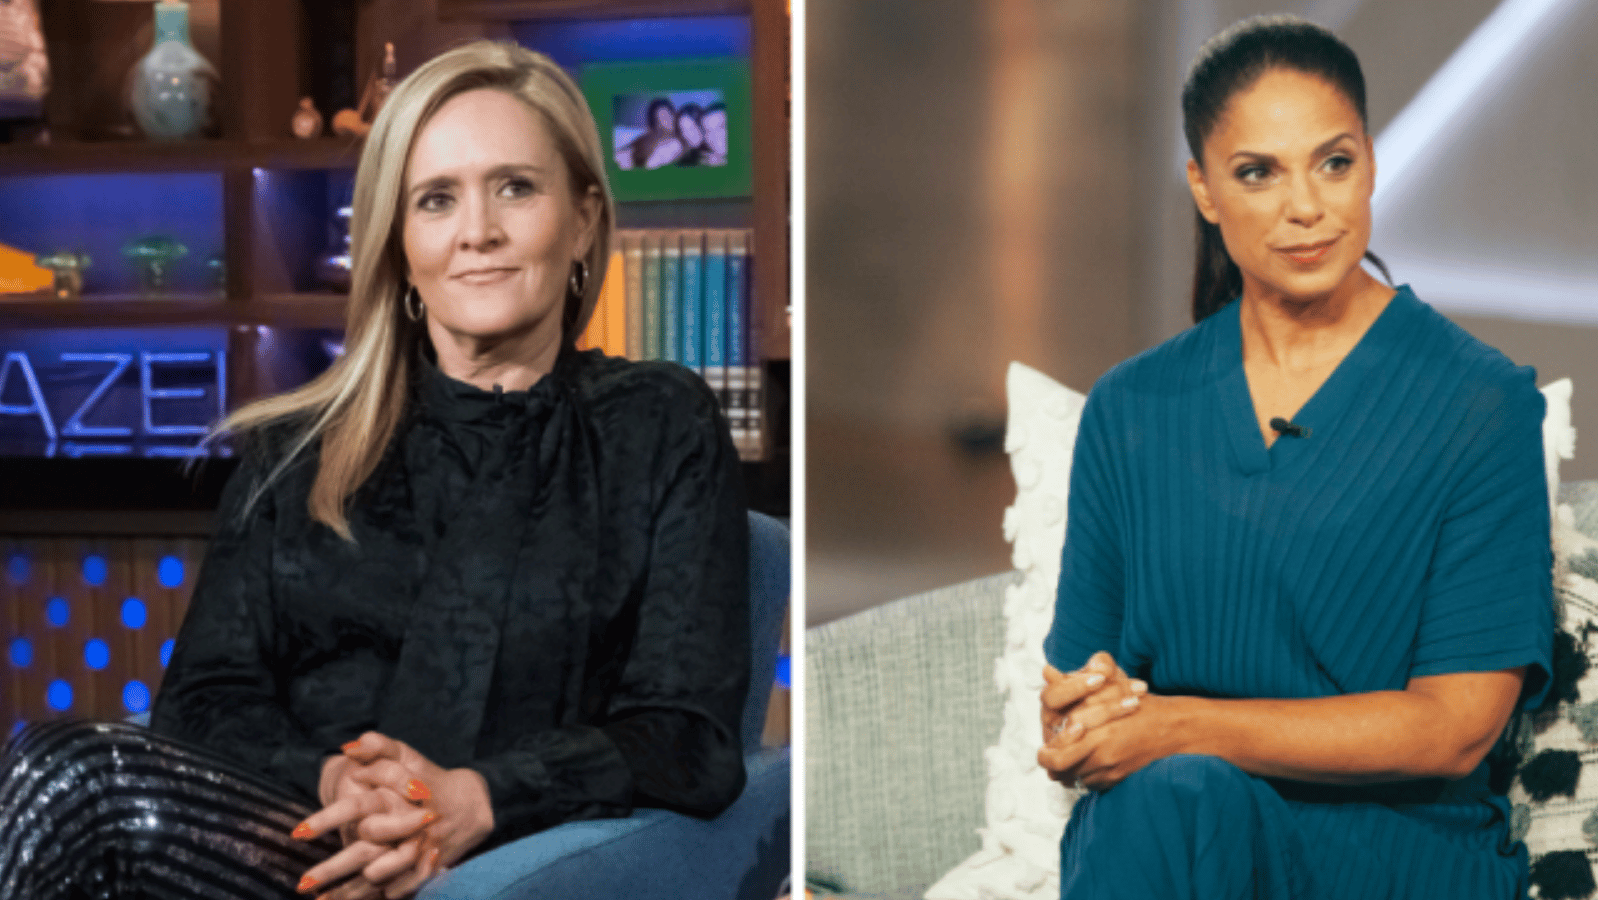 Samantha Bee & Soledad O’Brien Team On Comedic Docuseries About “Urgent Mess” Of Women’s Health Care In U.S.